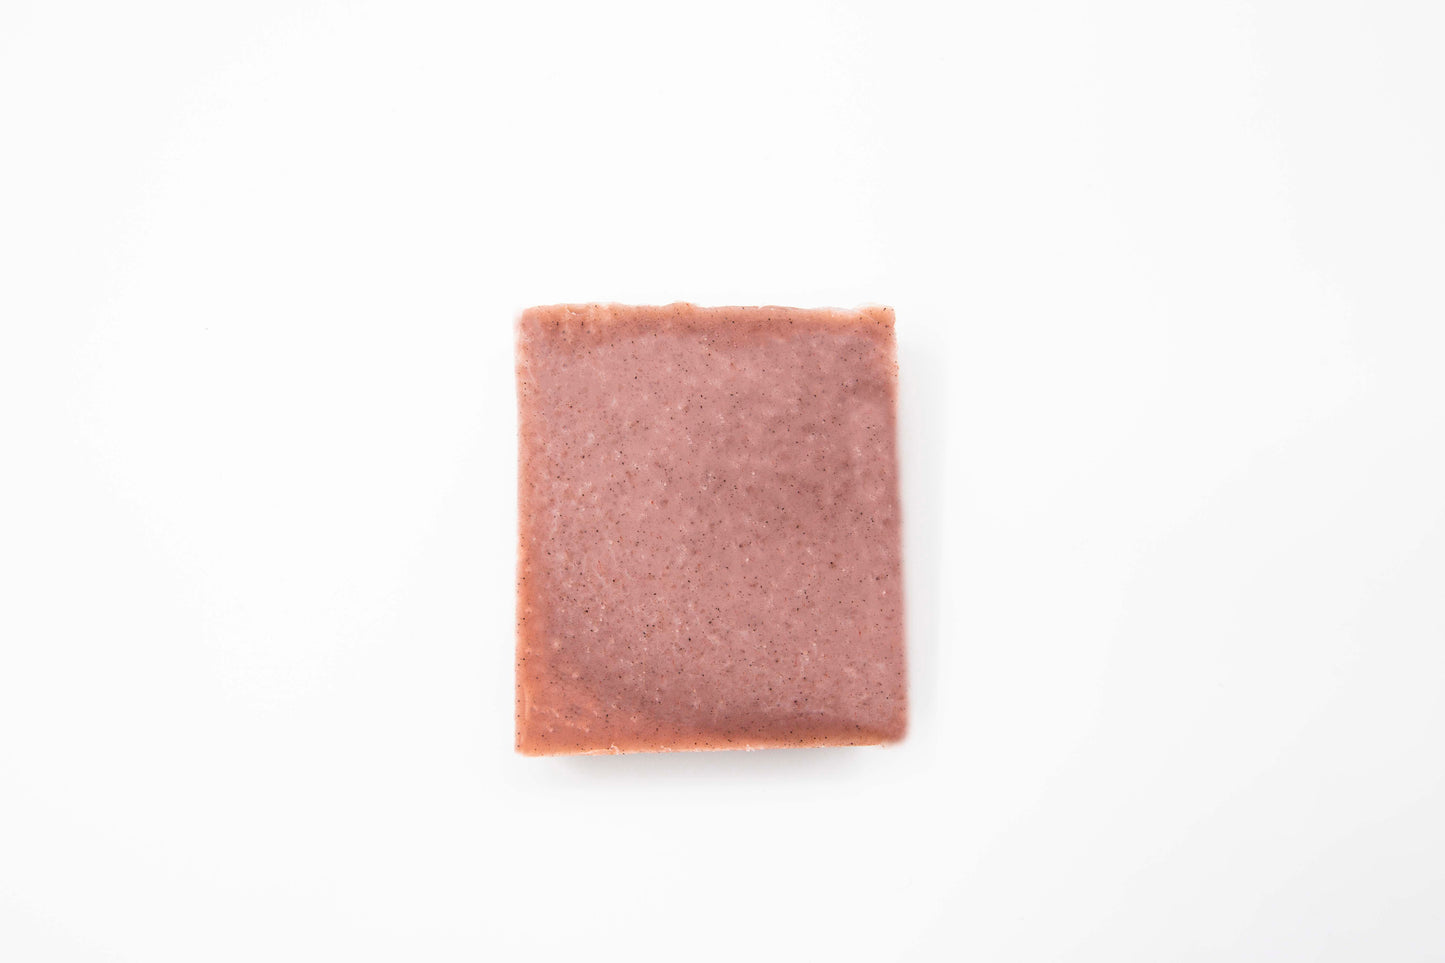 Pale red Cinnamon rosemary soap bar speckled with dark brown cinnamon sits on a clean white background